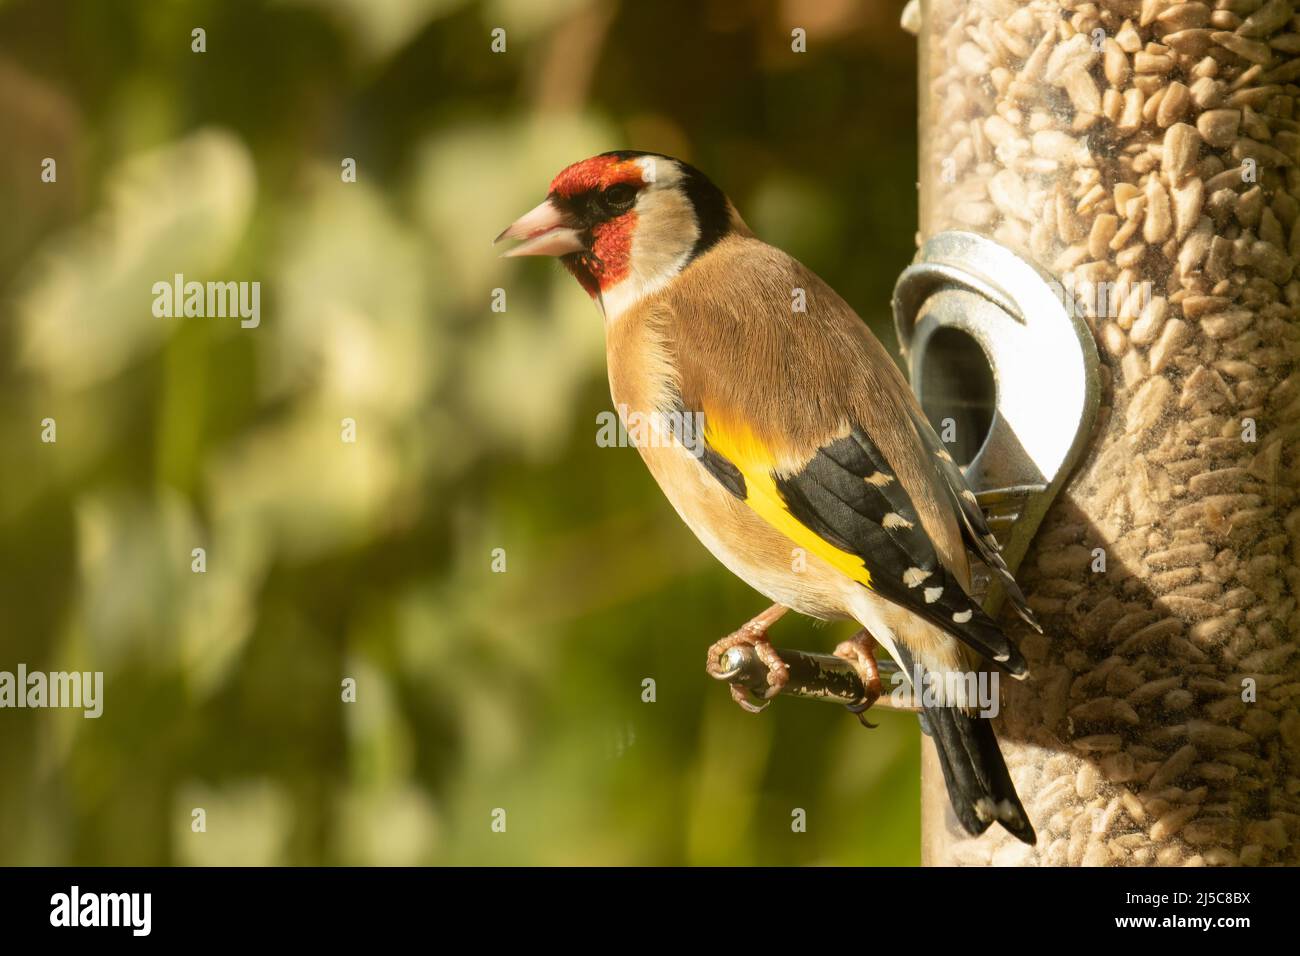 Goldfinch, Carduelis carduelis, perching on bird feeder full of sunflowers hearts with blurred leaf background Stock Photo